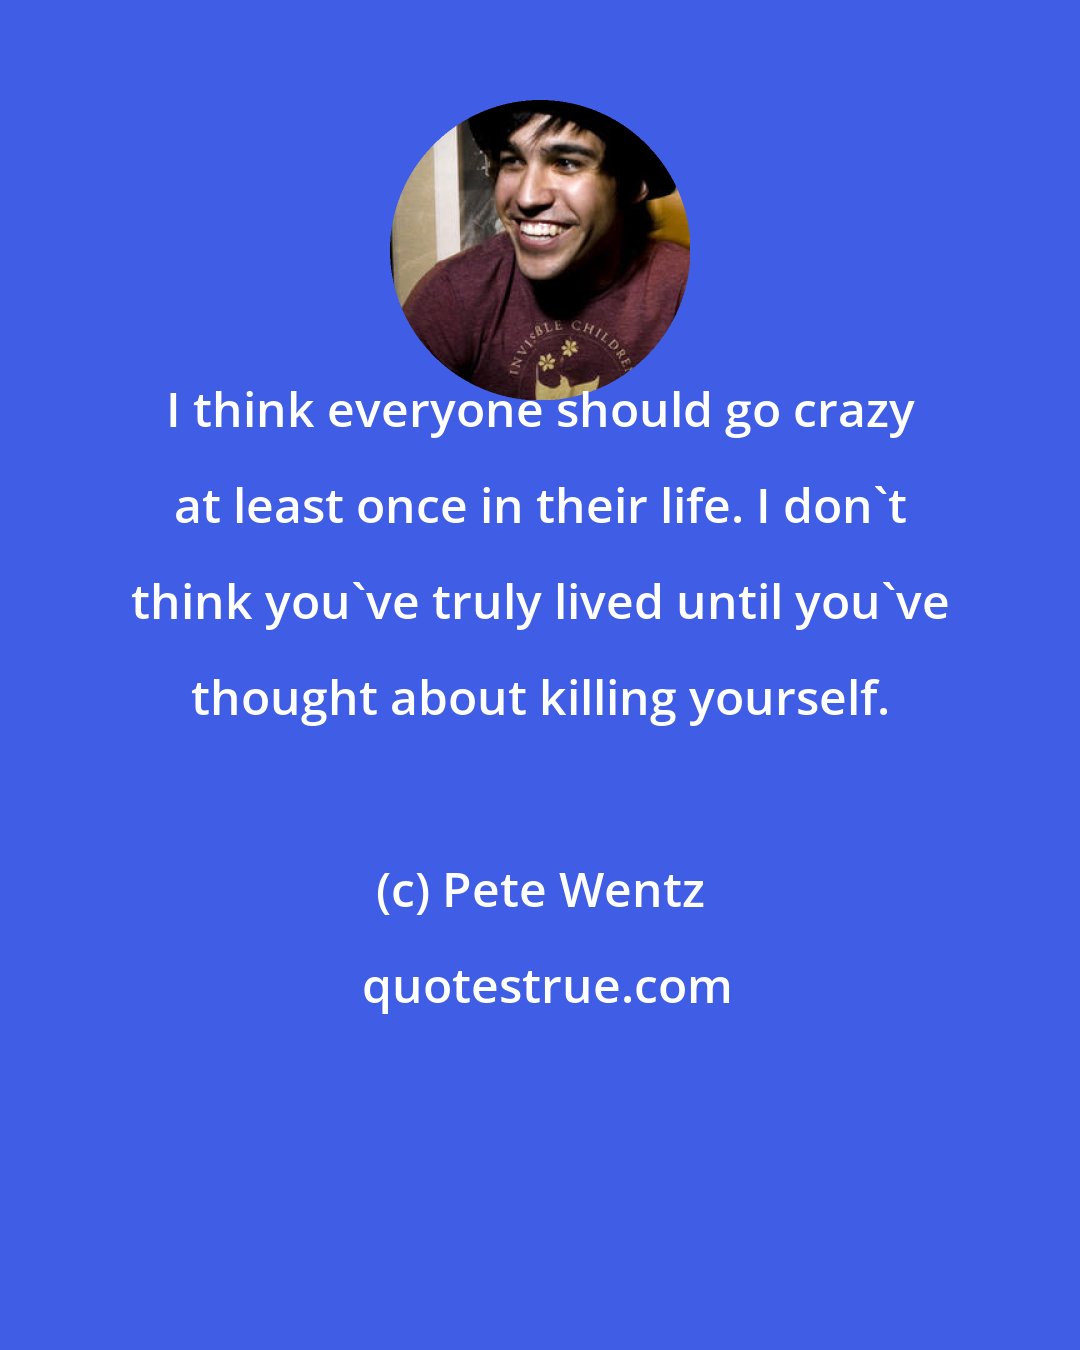 Pete Wentz: I think everyone should go crazy at least once in their life. I don't think you've truly lived until you've thought about killing yourself.